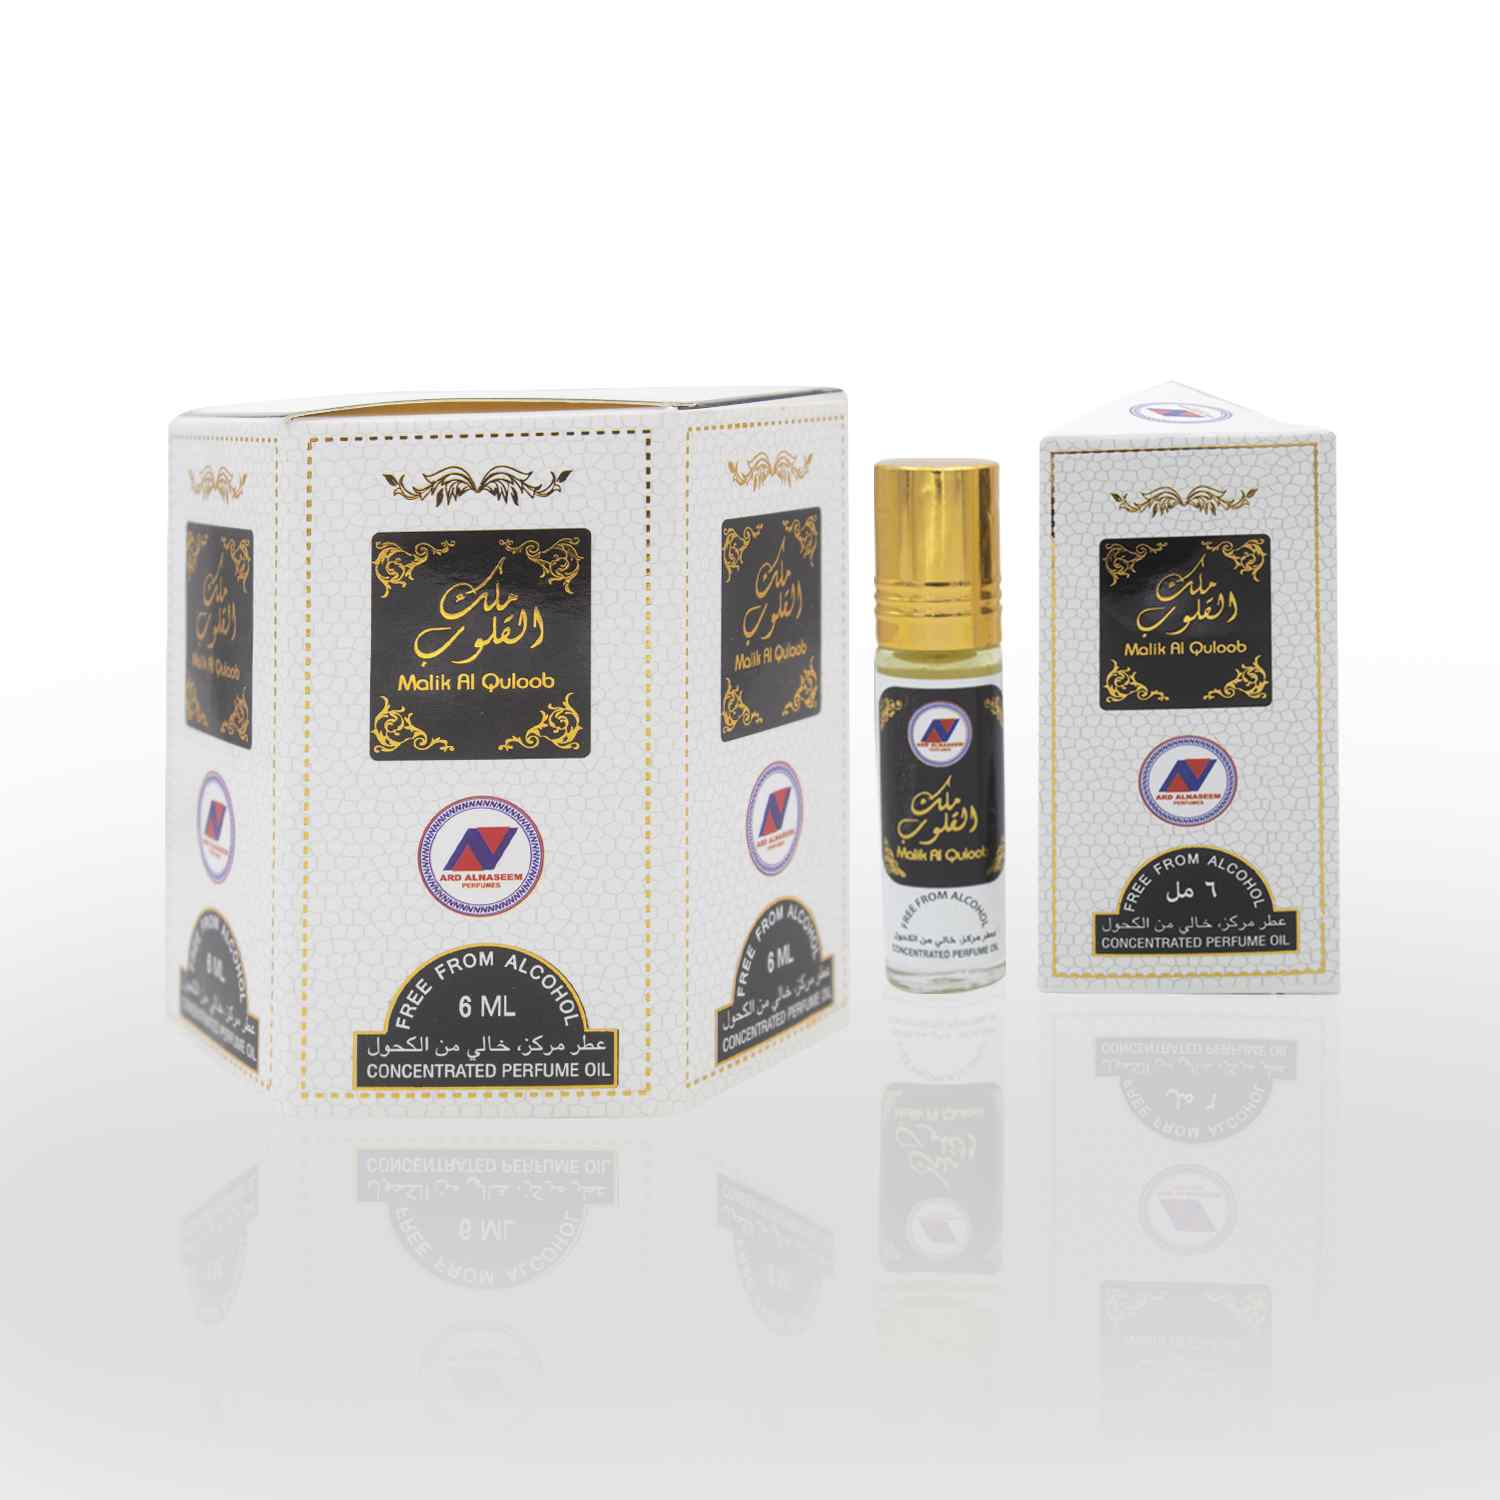 Malik Al Quloob 6ml Attar is a concentered perfume oil, free from Alcohol. It is a product of ARD perfumes. Made in UAE